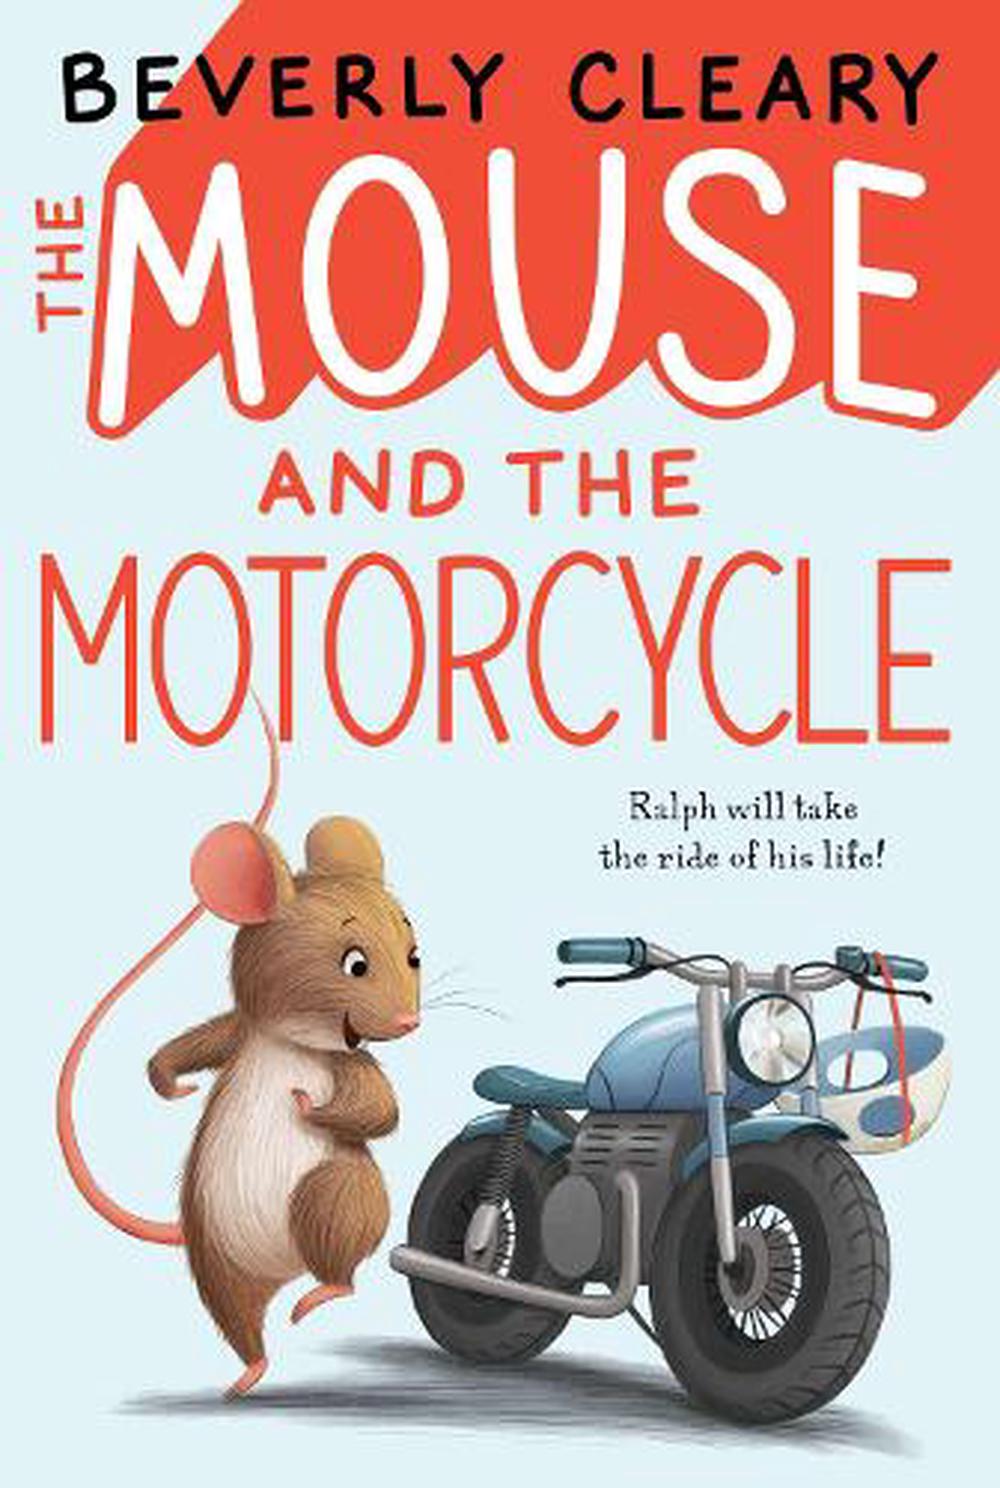 the mouse and the motorcycle author